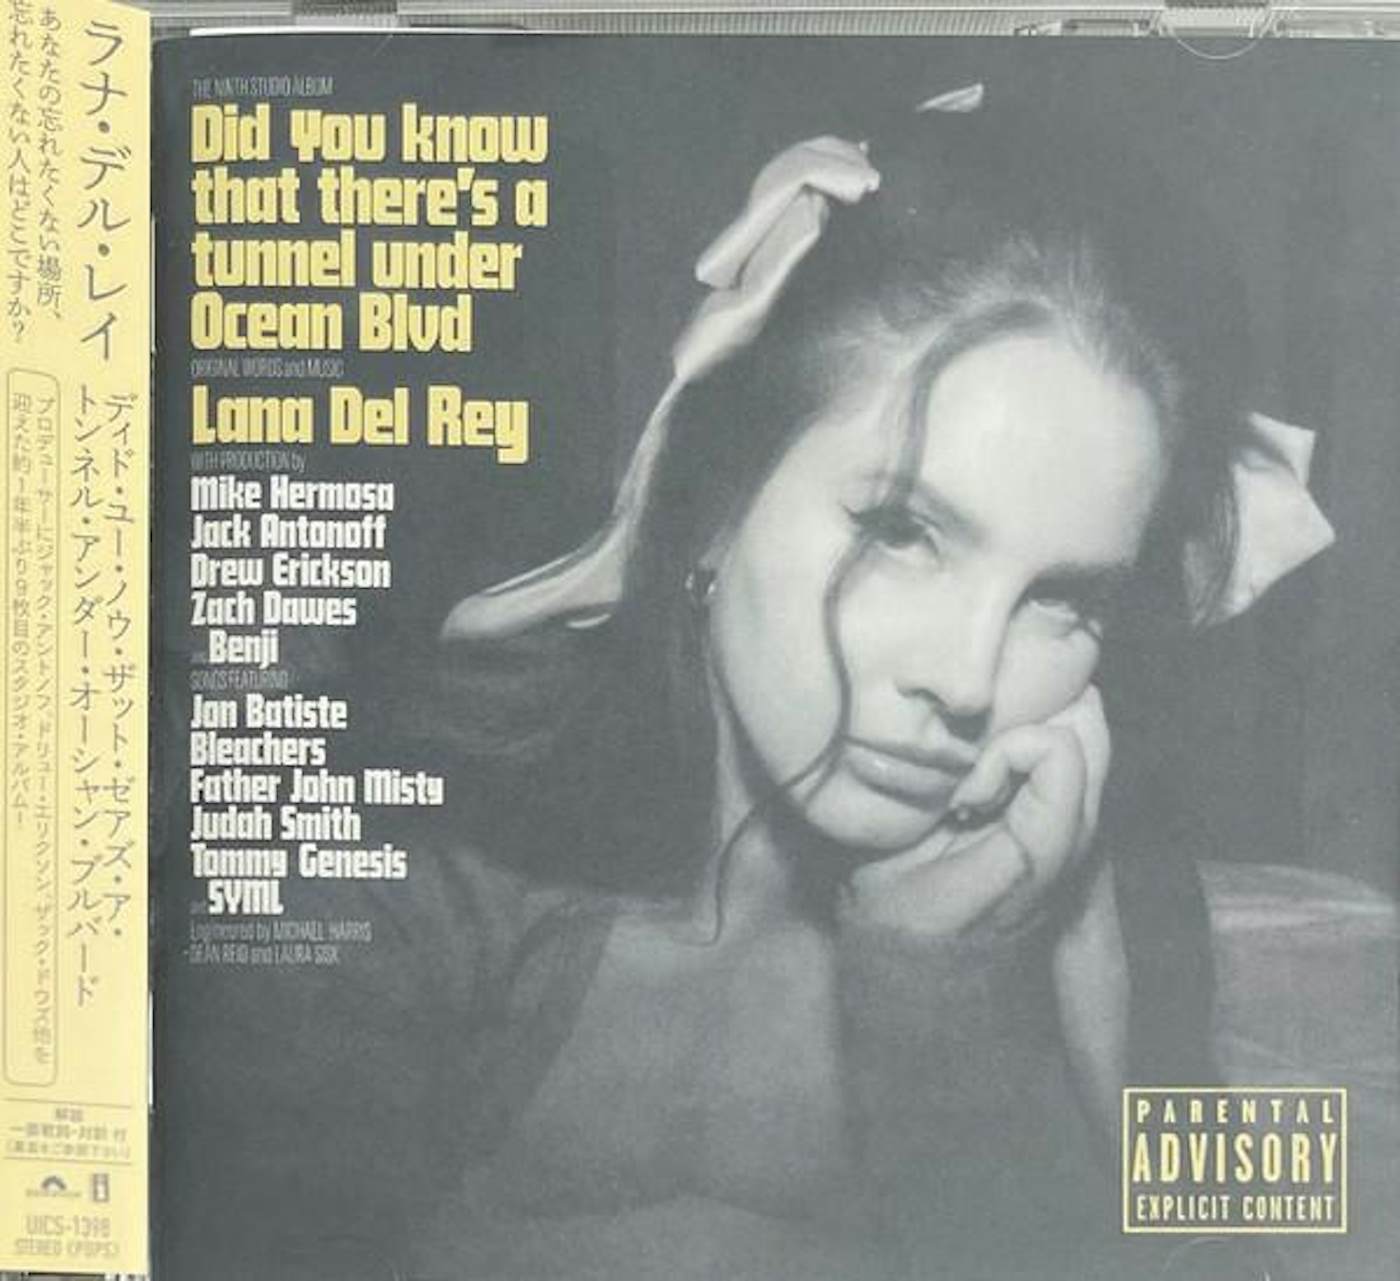 Lana Del Rey DID YOU KNOW THAT THERE'S A TUNNEL UNDER OCEAN BLVD CD